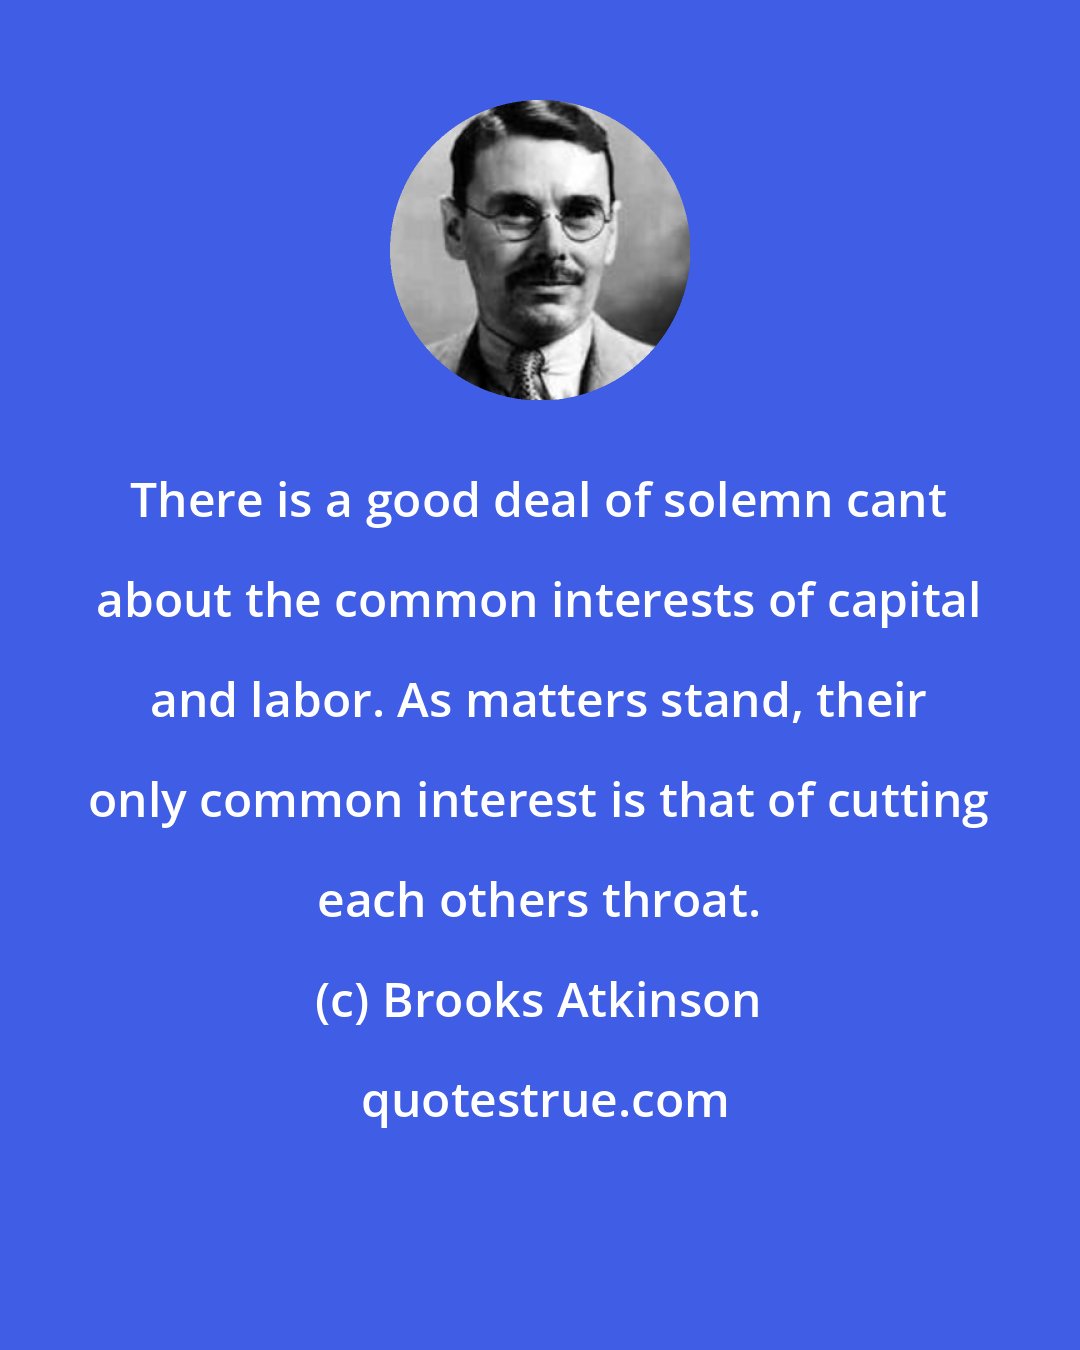 Brooks Atkinson: There is a good deal of solemn cant about the common interests of capital and labor. As matters stand, their only common interest is that of cutting each others throat.